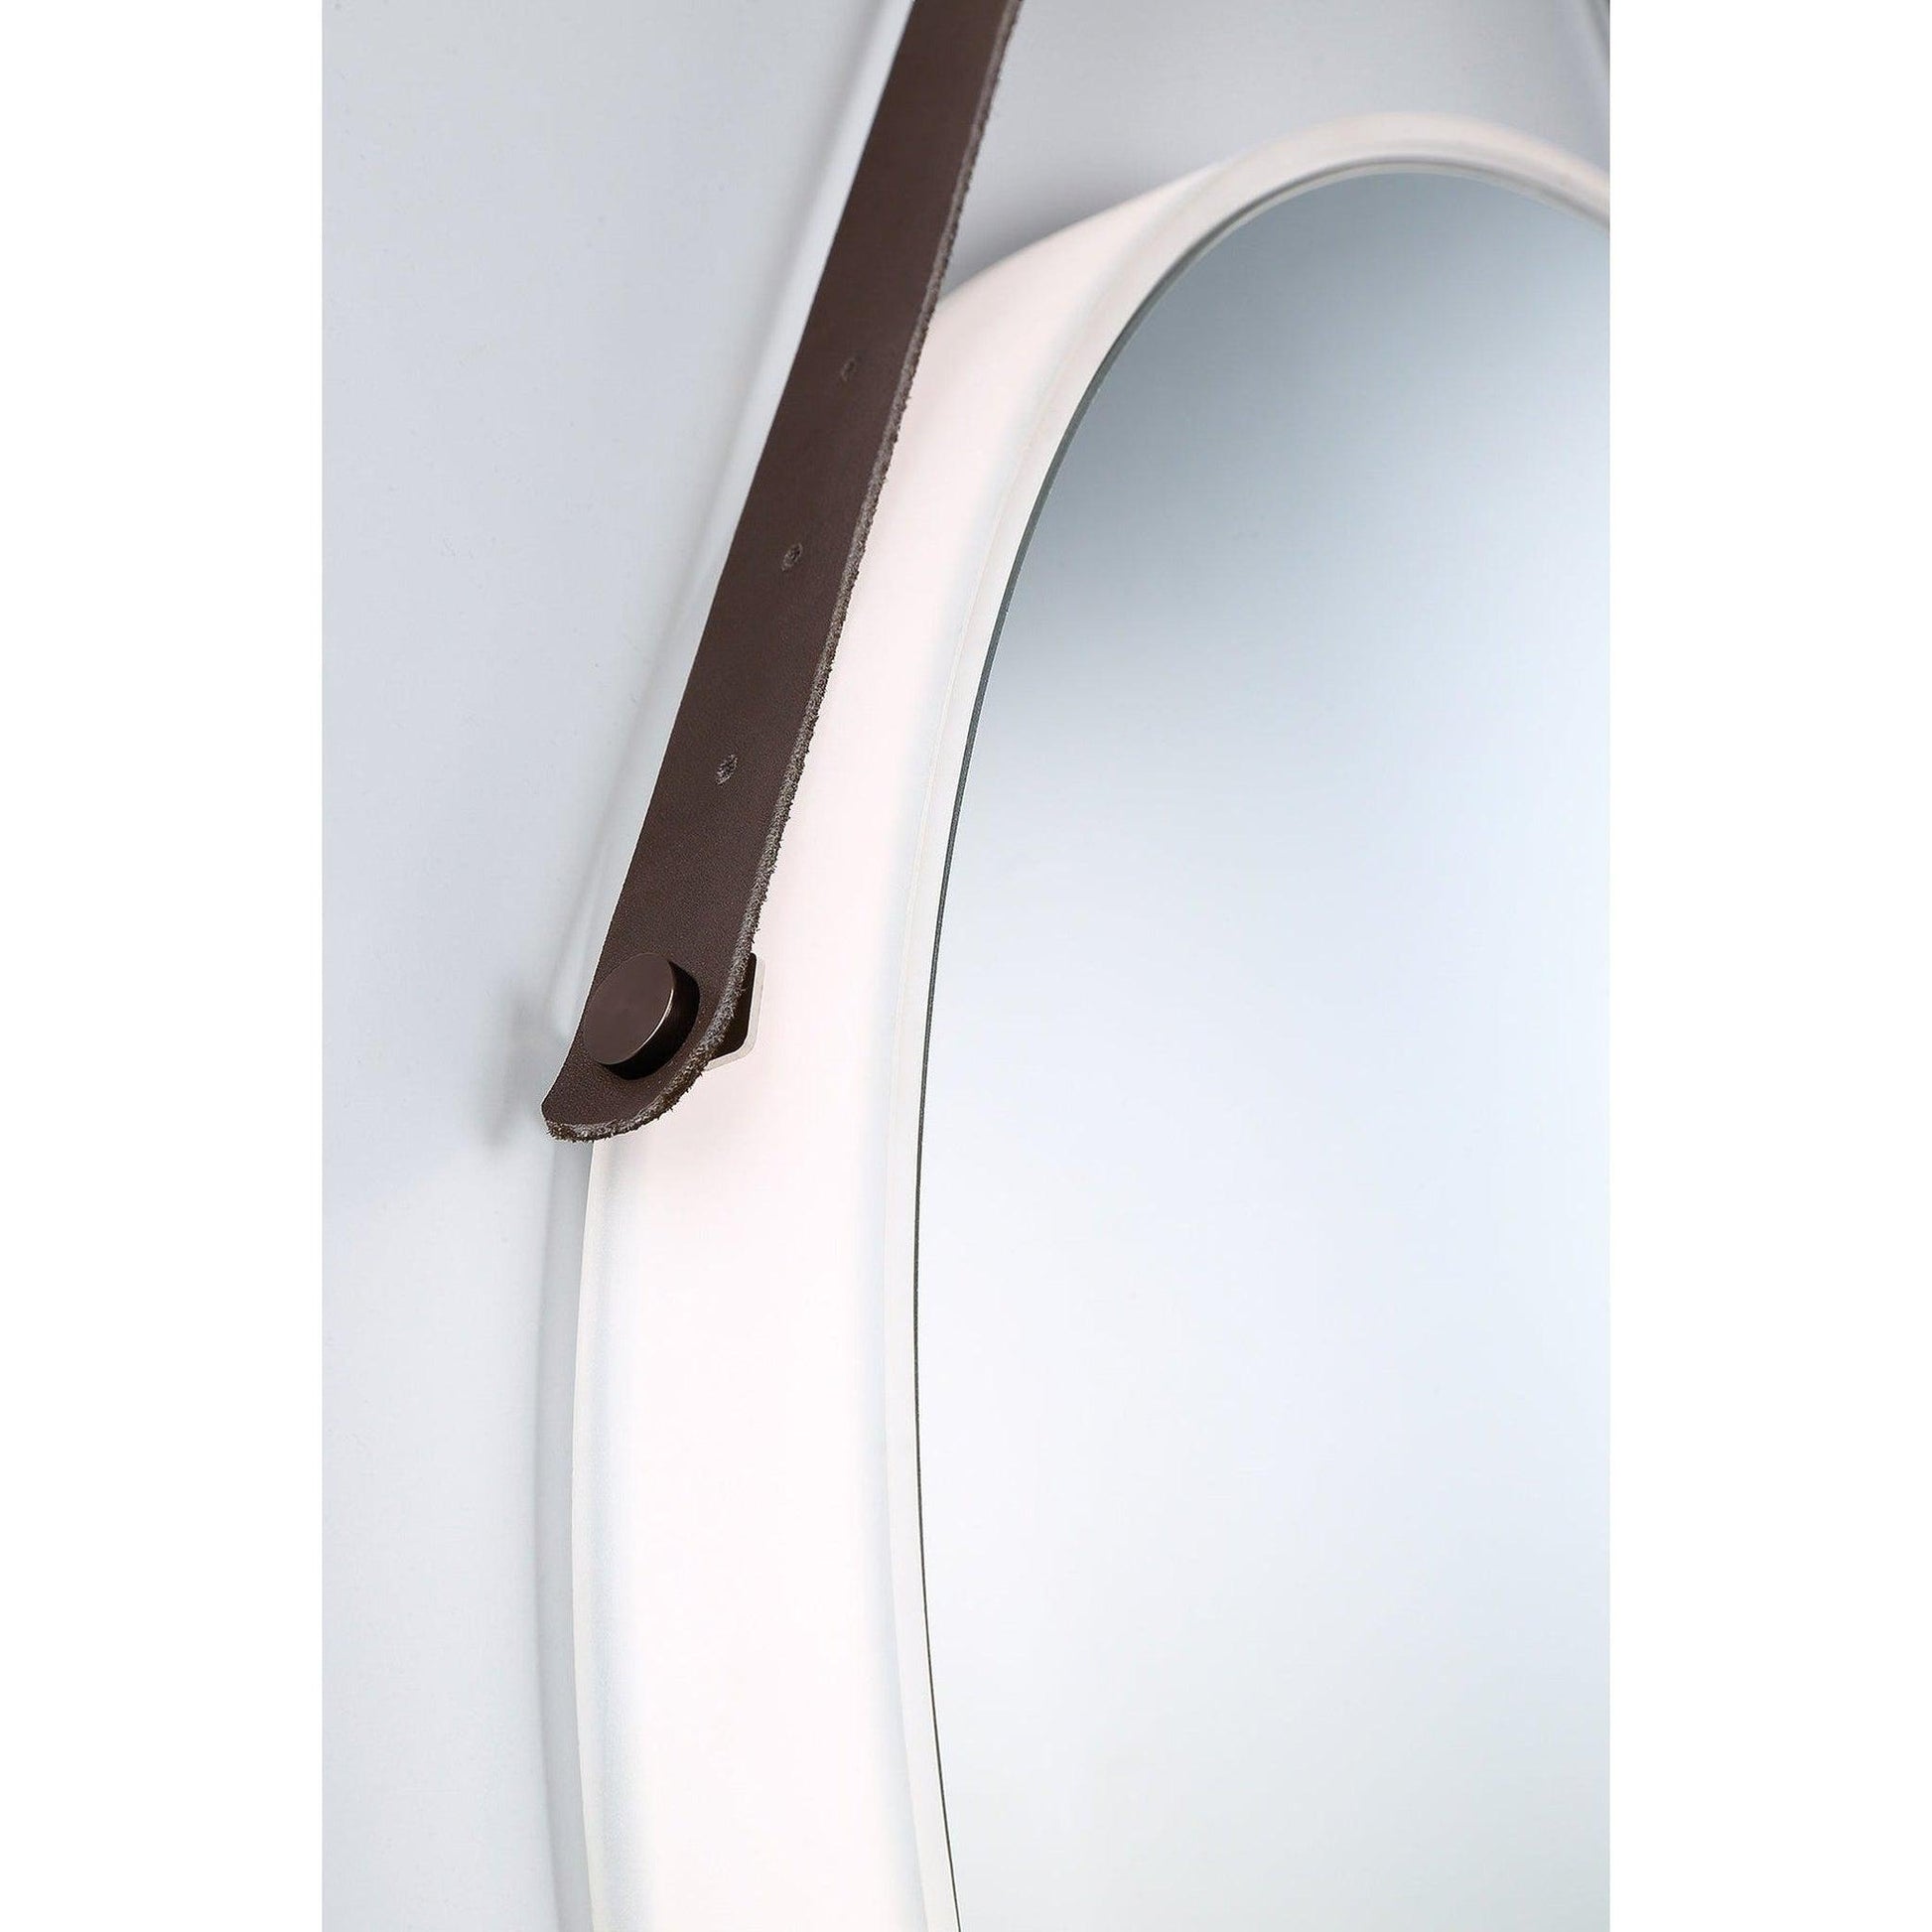 Eurofase Lighting Salerno 24" Edge-Lit Integrated LED Round Mirror With Leather Strap